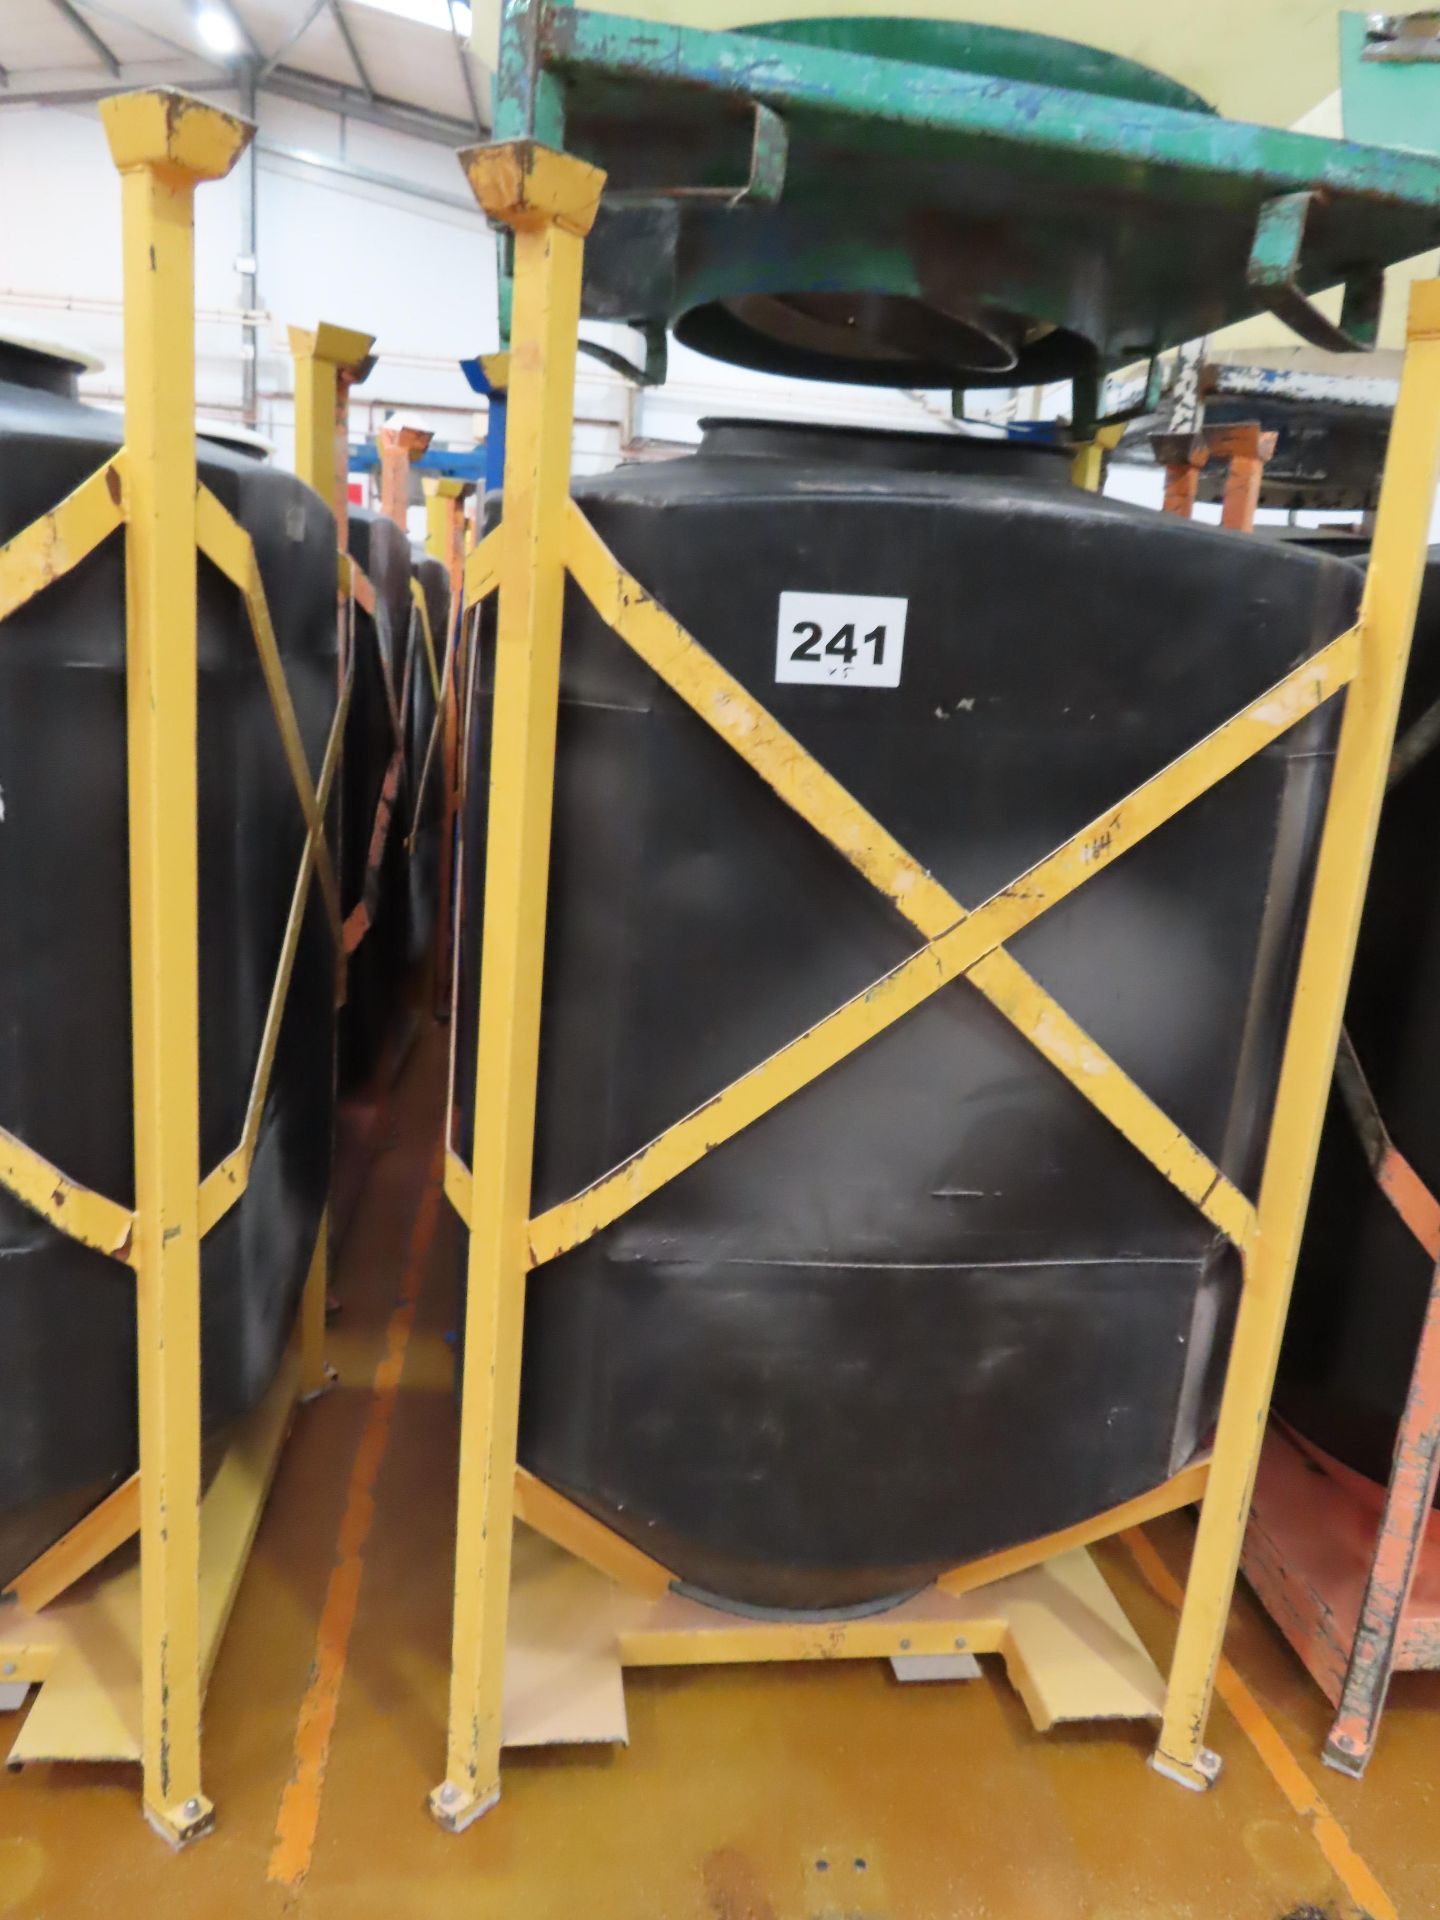 5 X FORKLIFTABLE FRAMES EACH HOLDING A MATCON IBC.